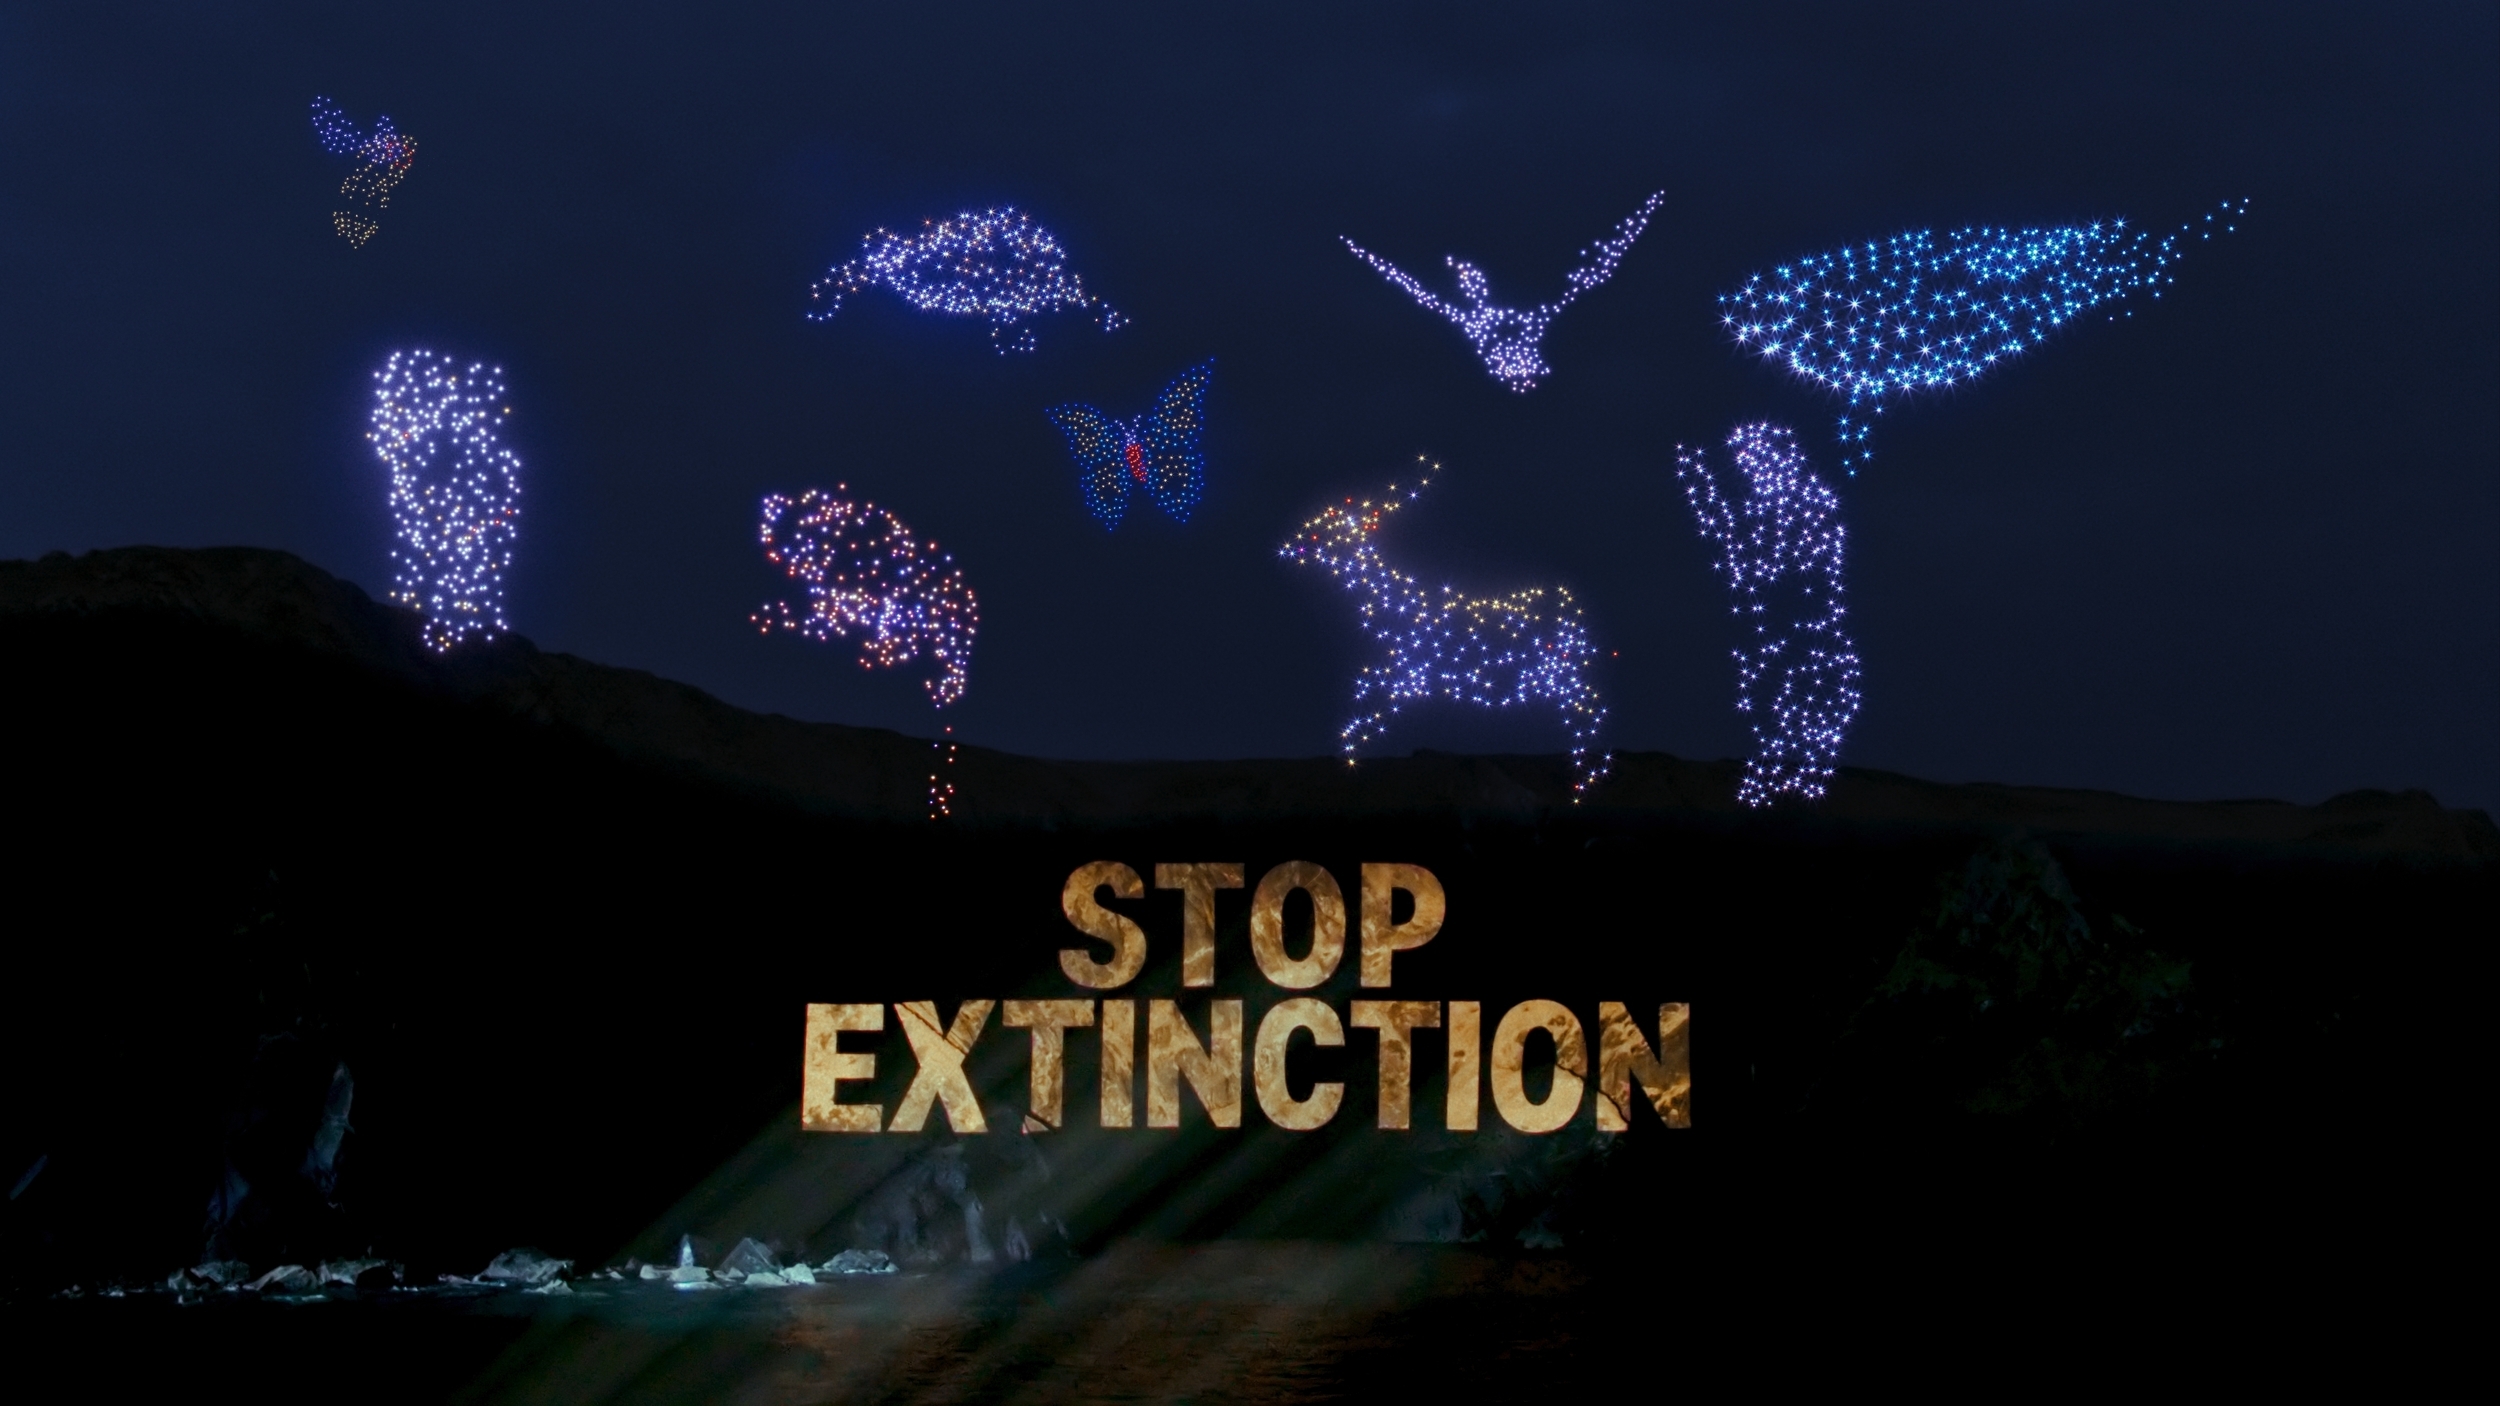 Hundreds of illuminated drones forming the shape of animals spread across the night sky. On a cliff below, the words 'Stop extinction' are projected in bold yellow lettering.